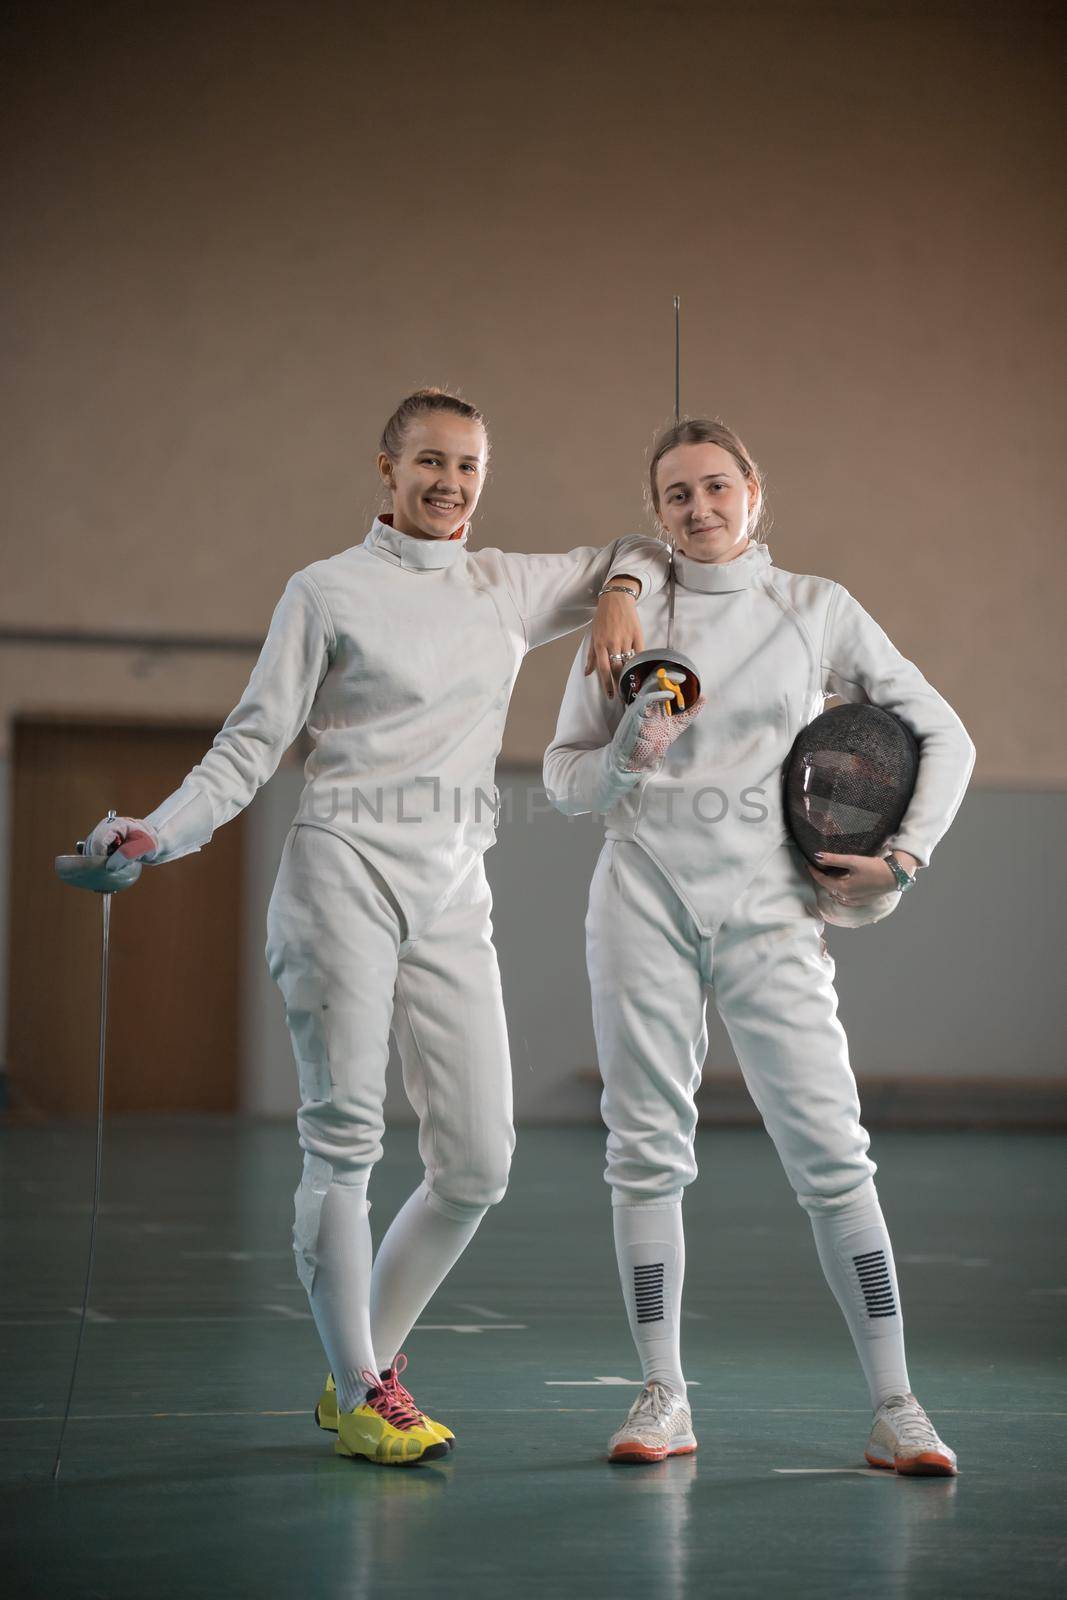 Two young women fencers looking at the camera and holding swords. Mid shot